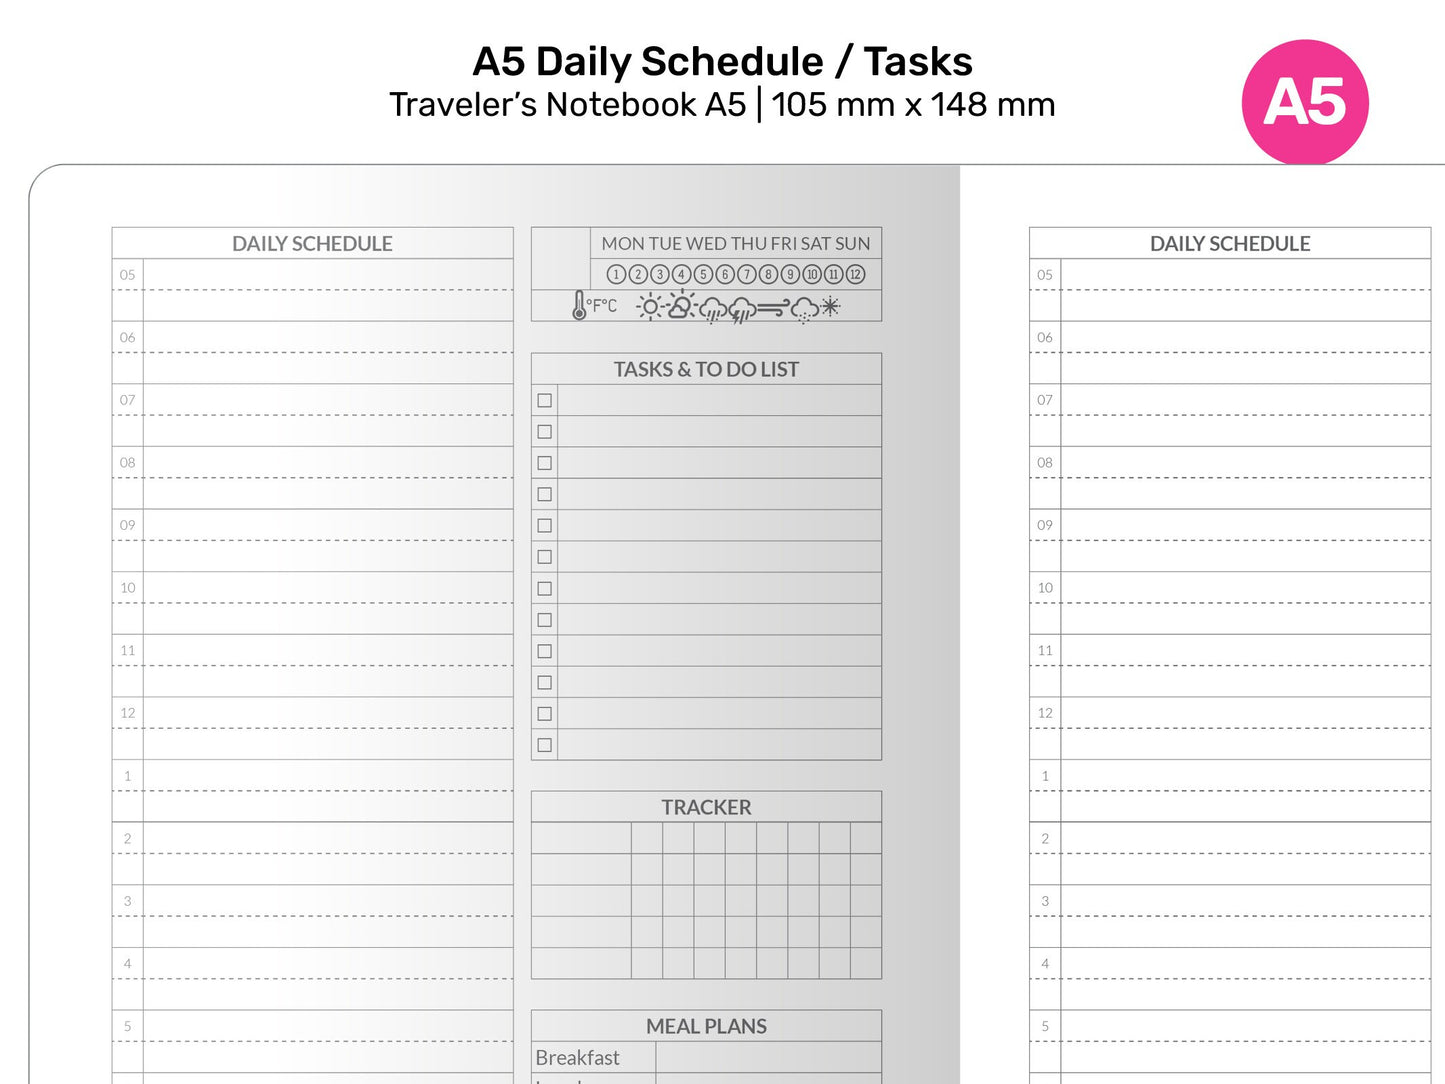 A5 TN DAILY Schedule Appointment Tasks & Tracker Printable Planner Insert A522-001